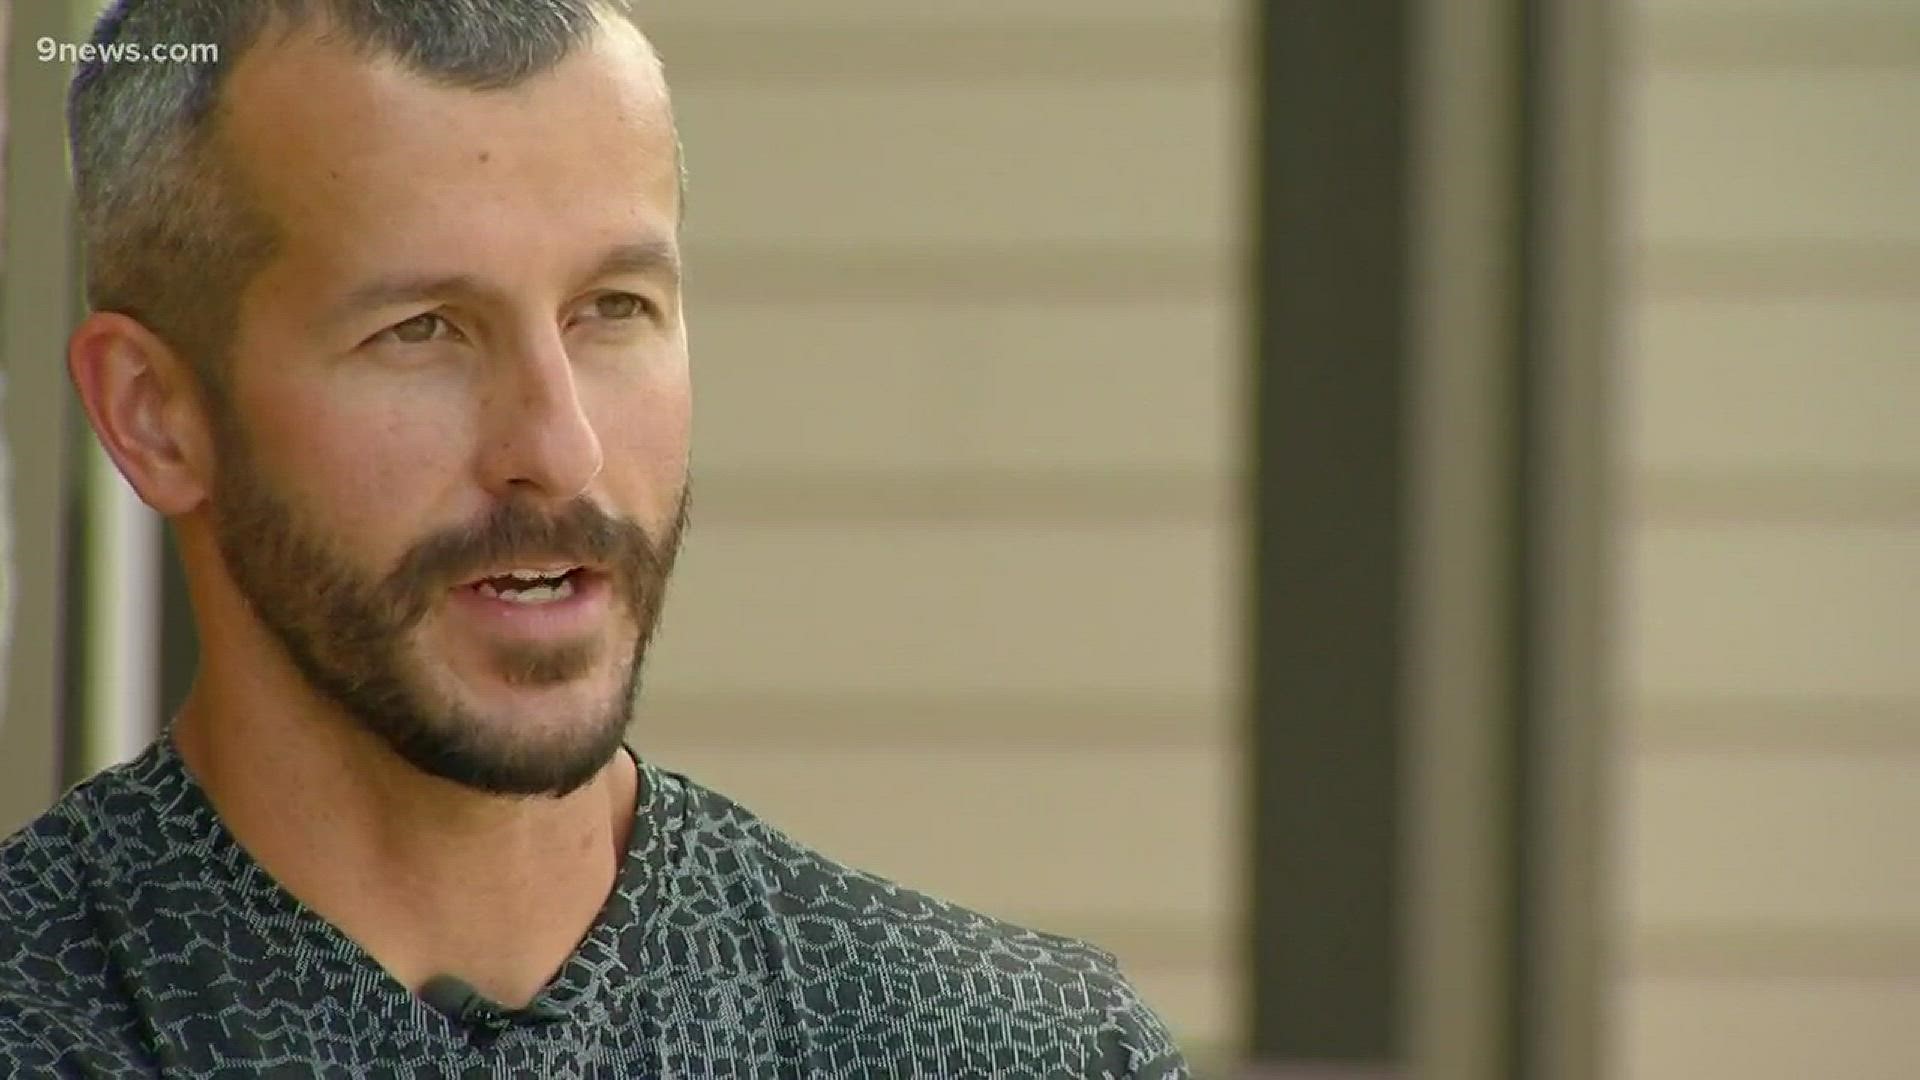 Neighbors said they hope to find closure after Chris Watts on Tuesday pleaded "guilty," admitting he murdered his pregnant wife and the couple's two young daughters.